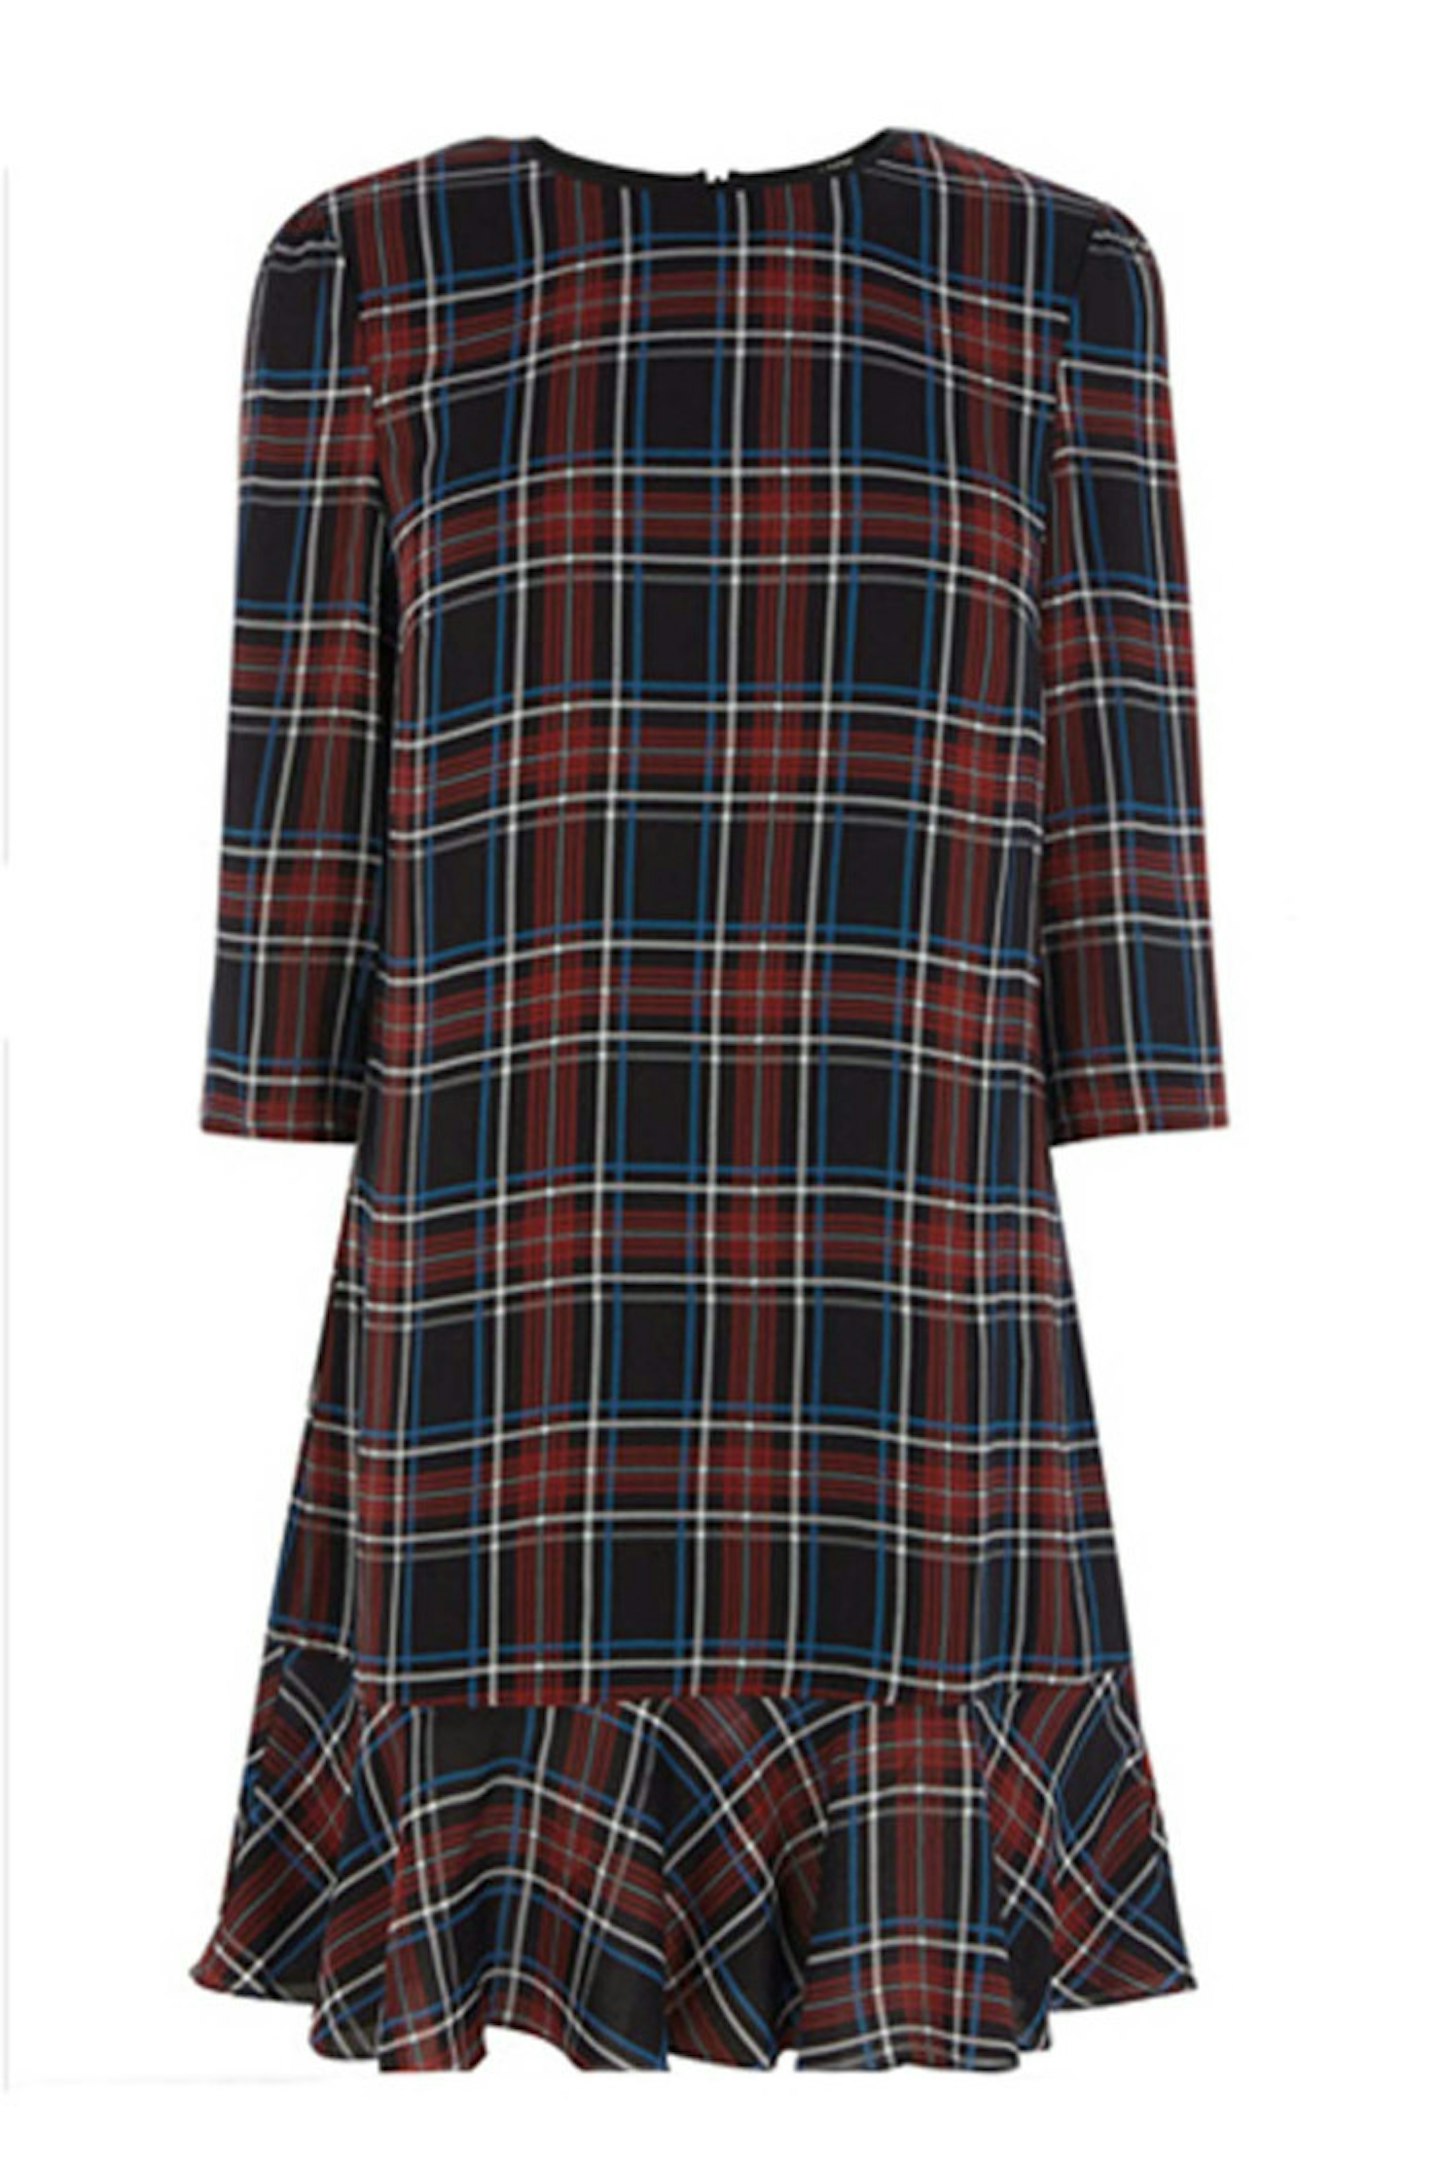 26. Checked dress, £48, Oasis